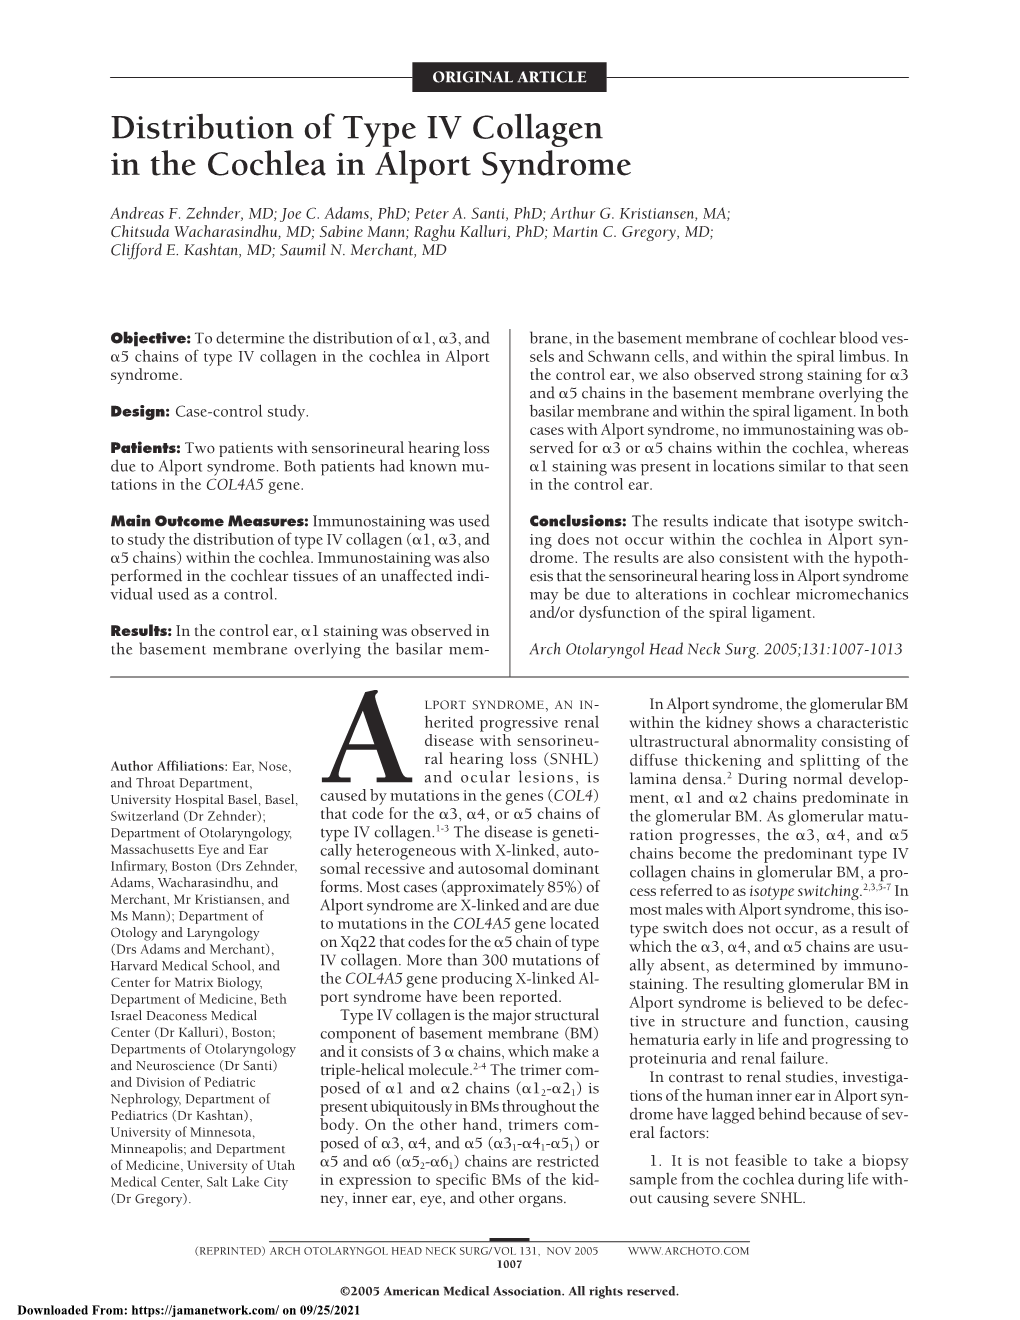 Distribution of Type IV Collagen in the Cochlea in Alport Syndrome